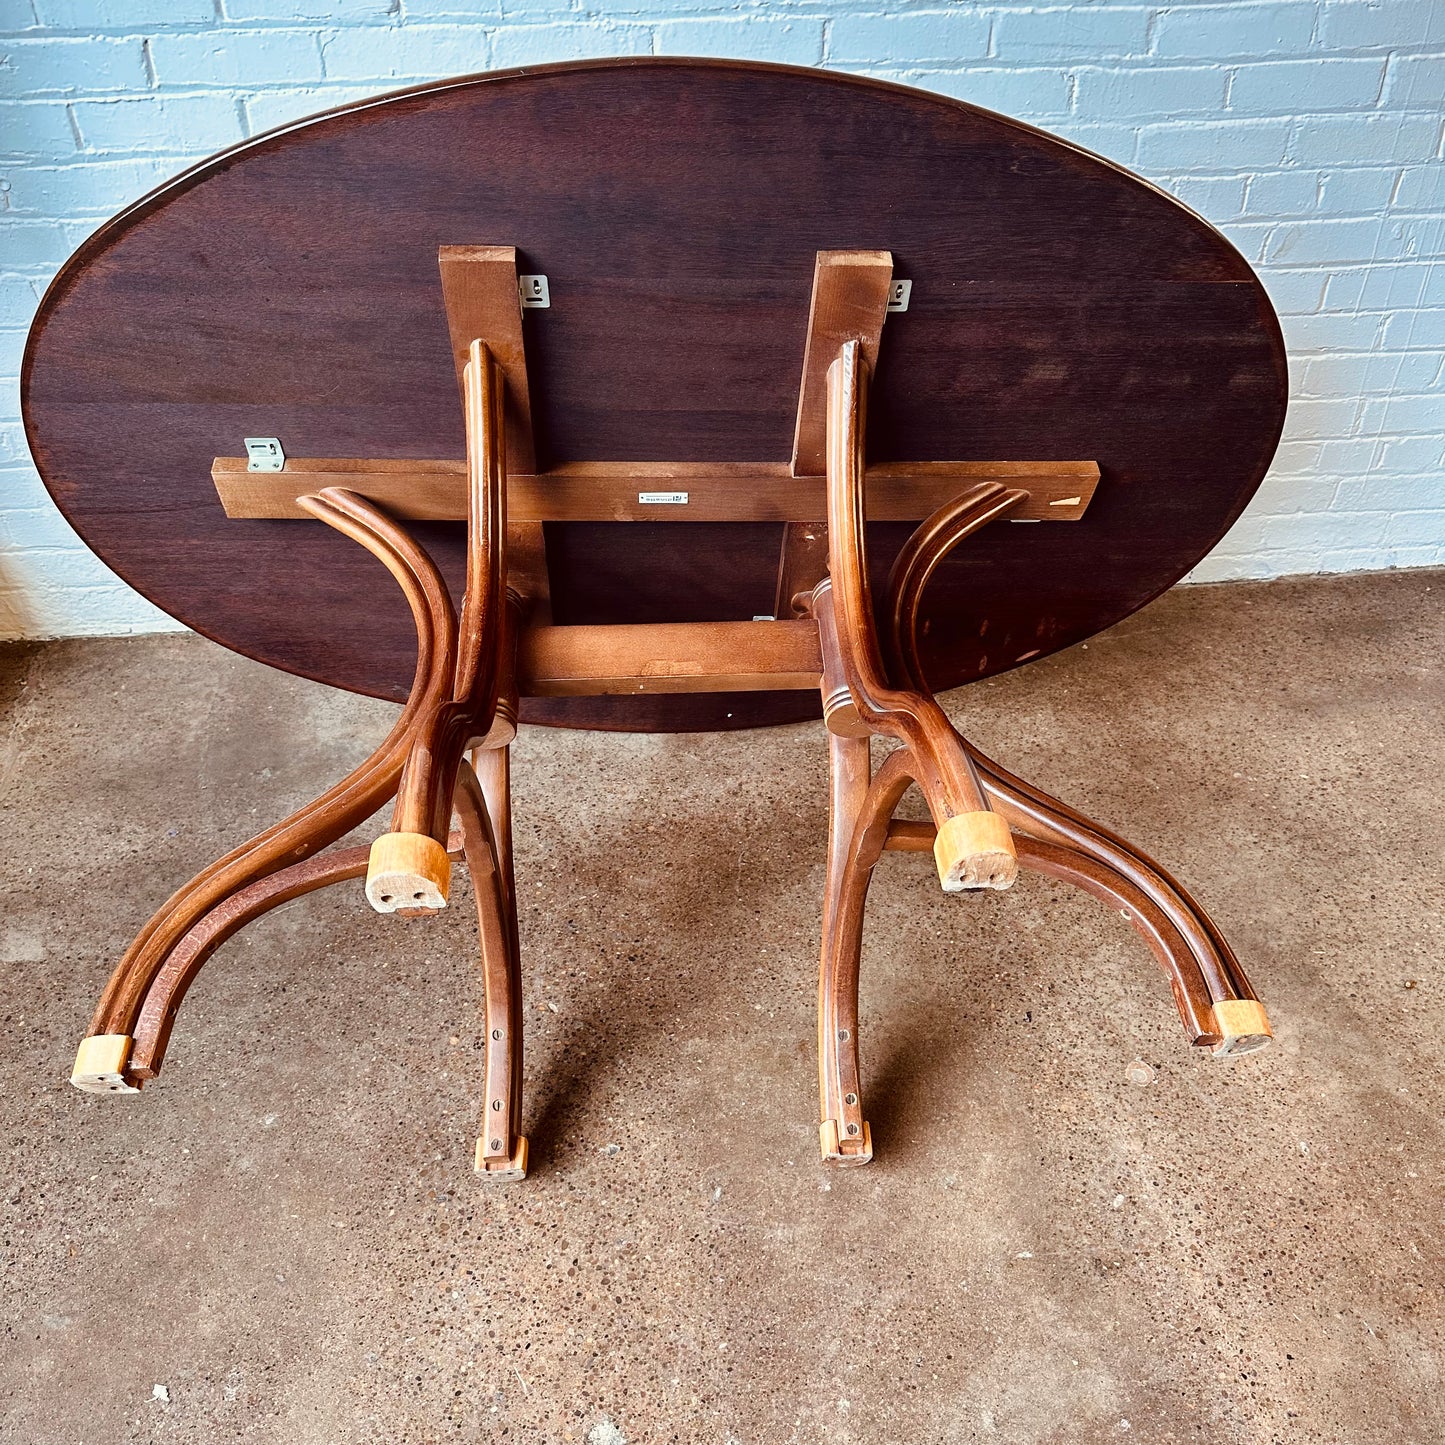 THONET BENTWOOD OVAL DINING TABLE FROM EARLY 20TH CENTURY